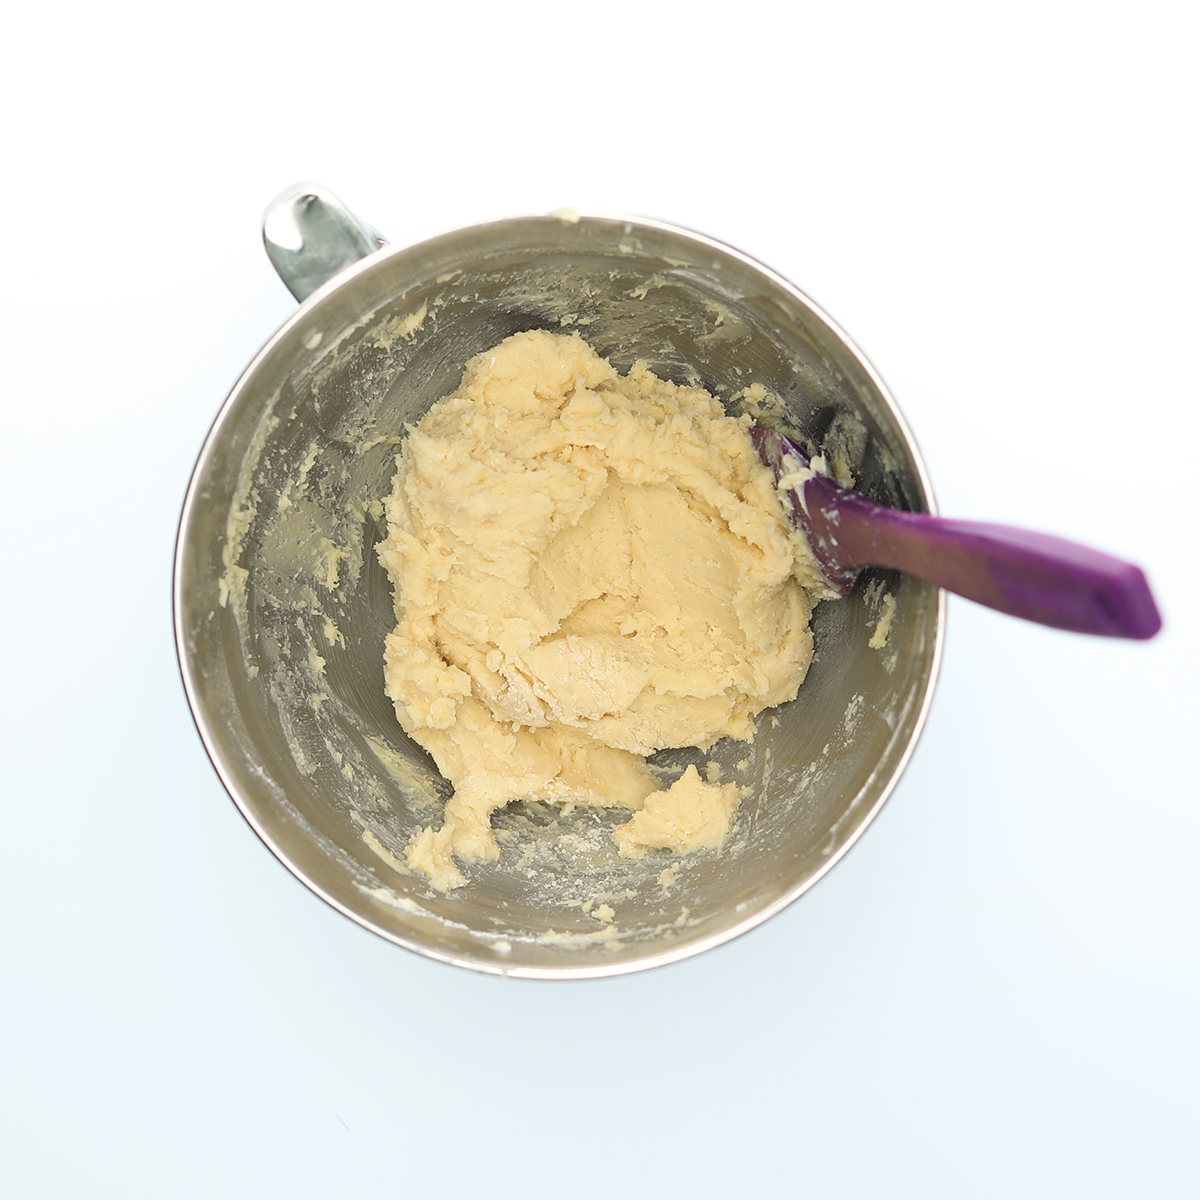 Shortbread dough in a mixing bowl with a purple spoon.